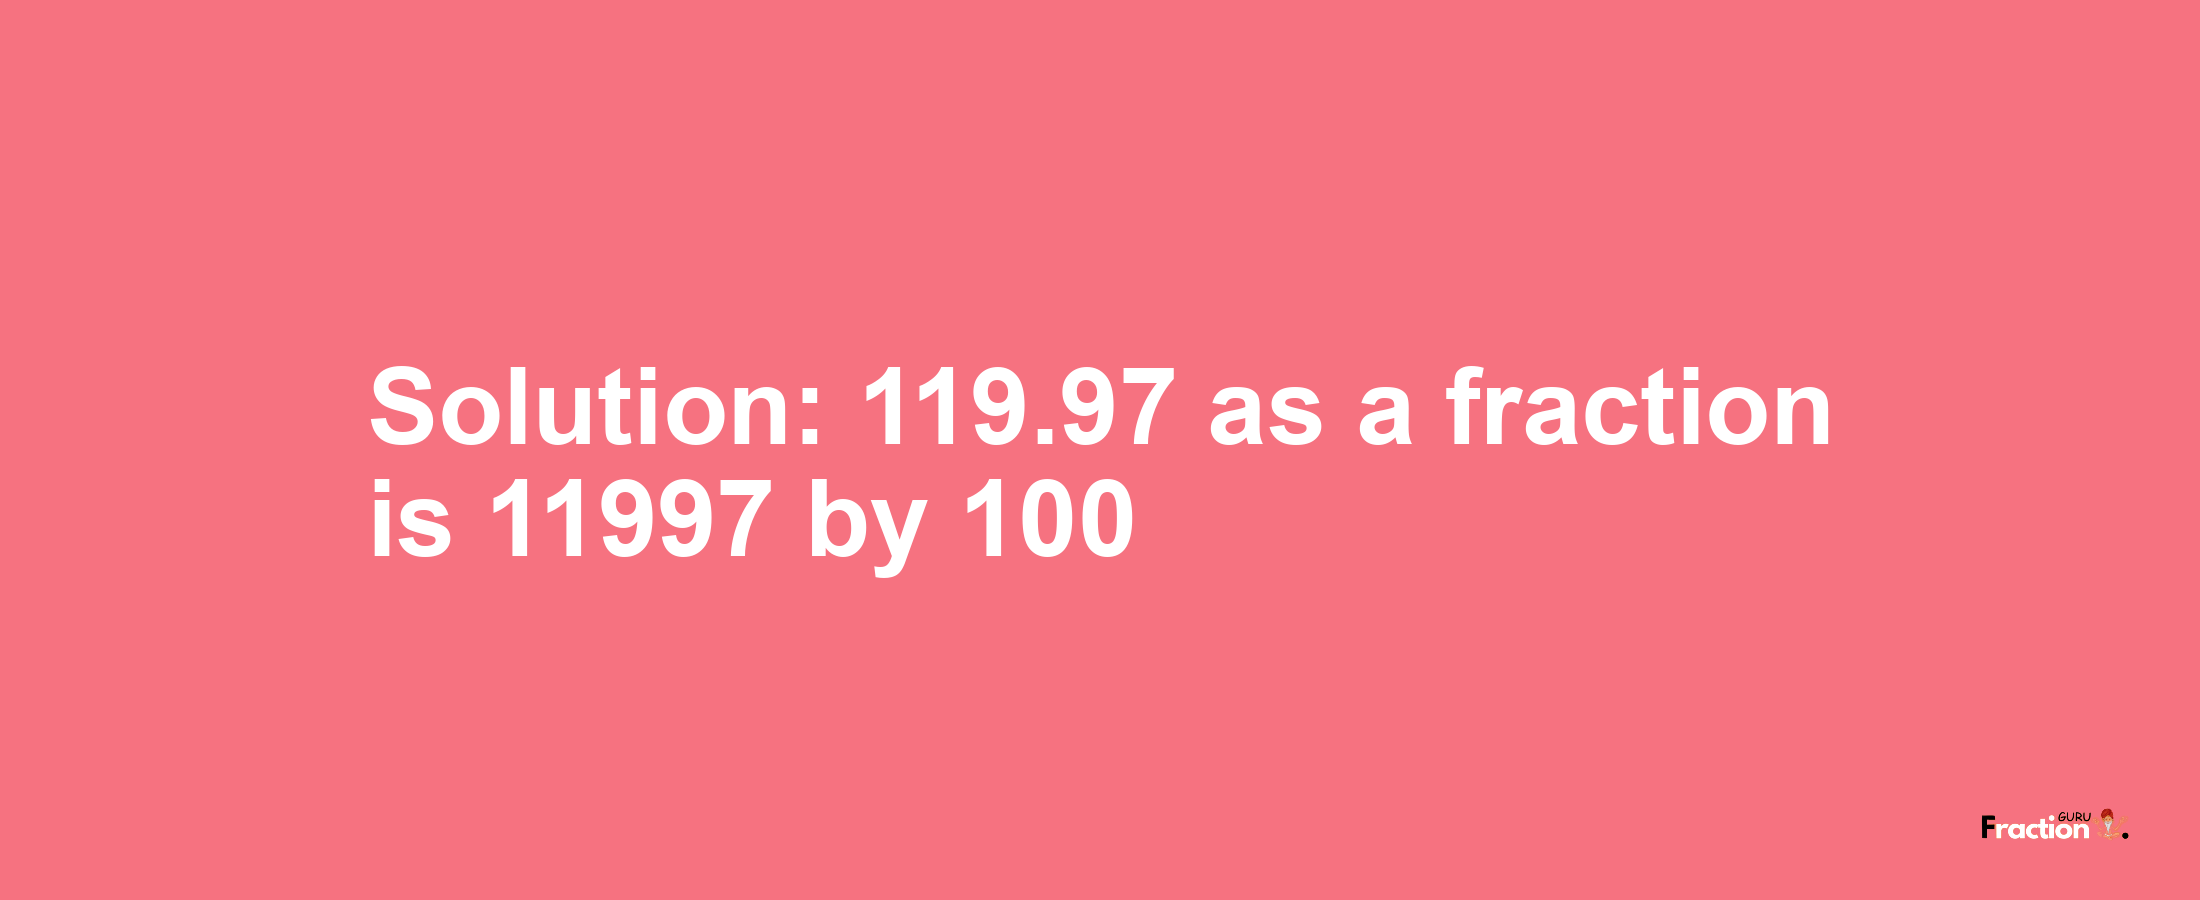 Solution:119.97 as a fraction is 11997/100